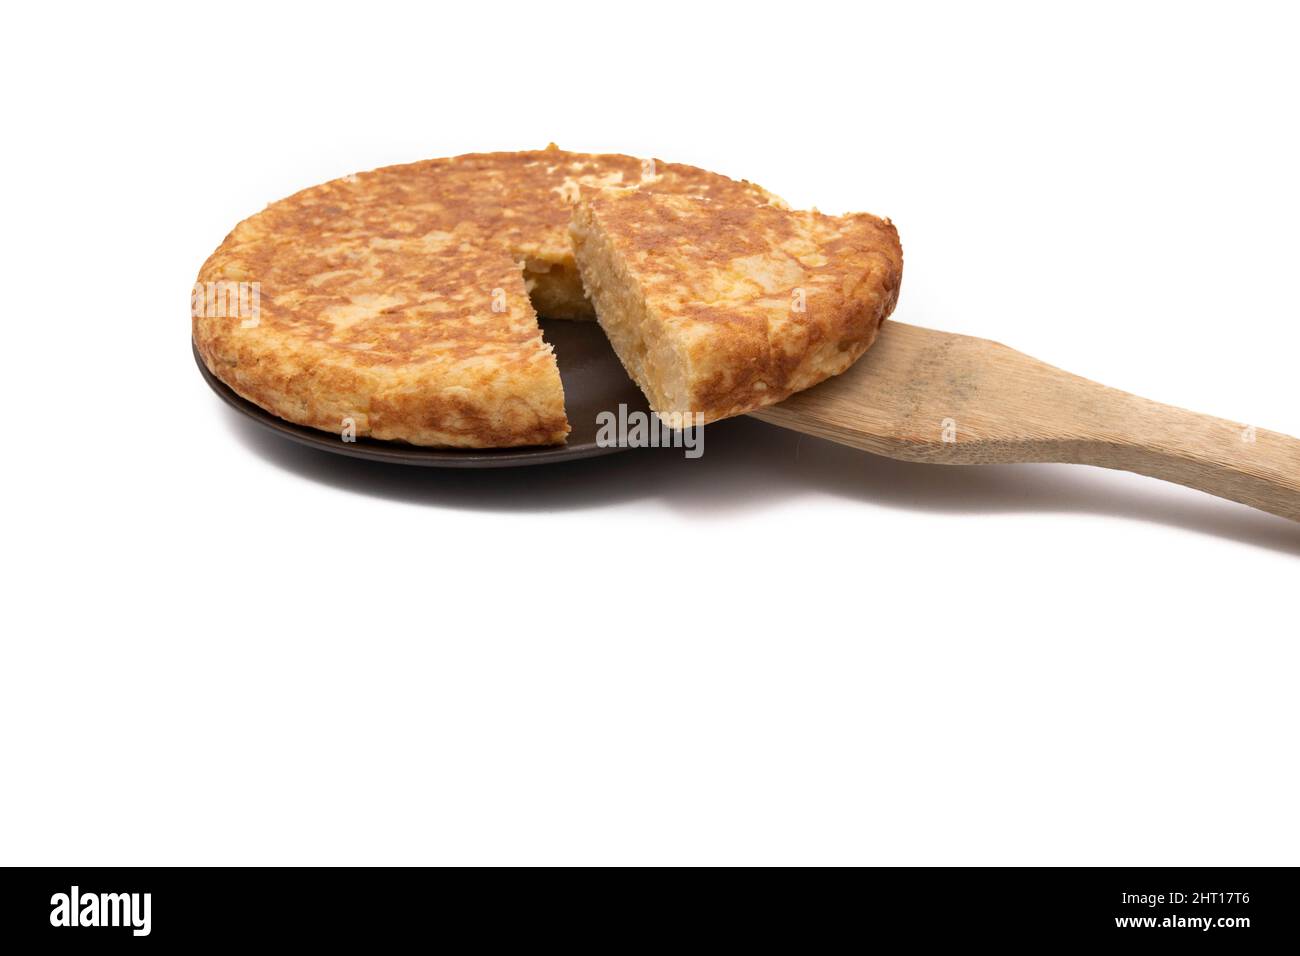 Potato omelette, known as 'Spanish omelette'. With a wooden spoon. Very consumed in Spain. Isolated on white background. Spanish food concept. Stock Photo